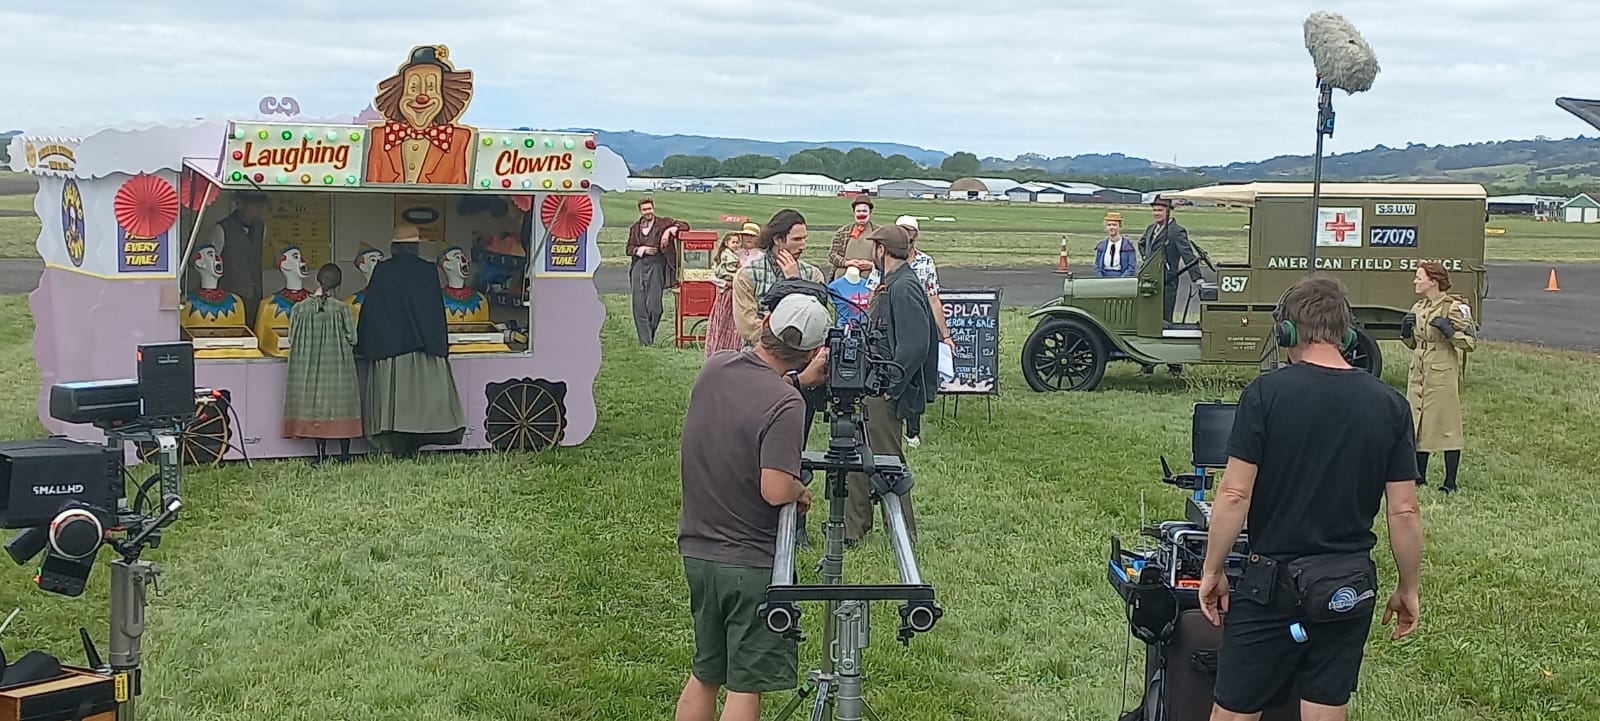 Laughing clowns game being used as film and tv props in Ardmore